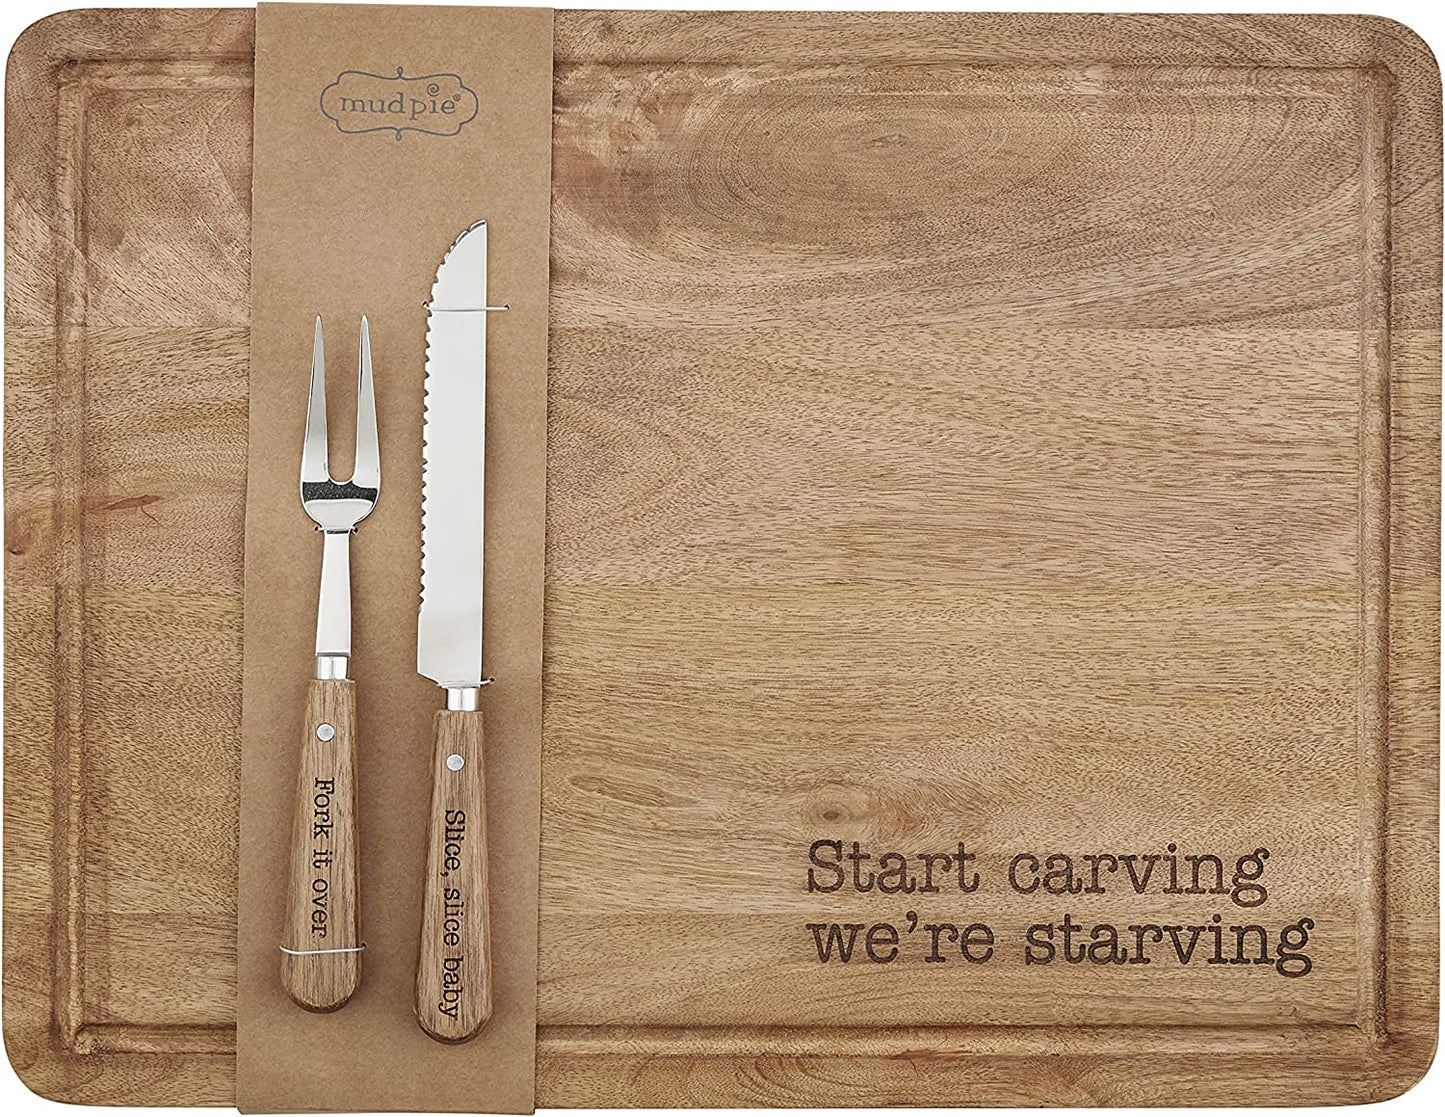 "We're Starving" Carving Board